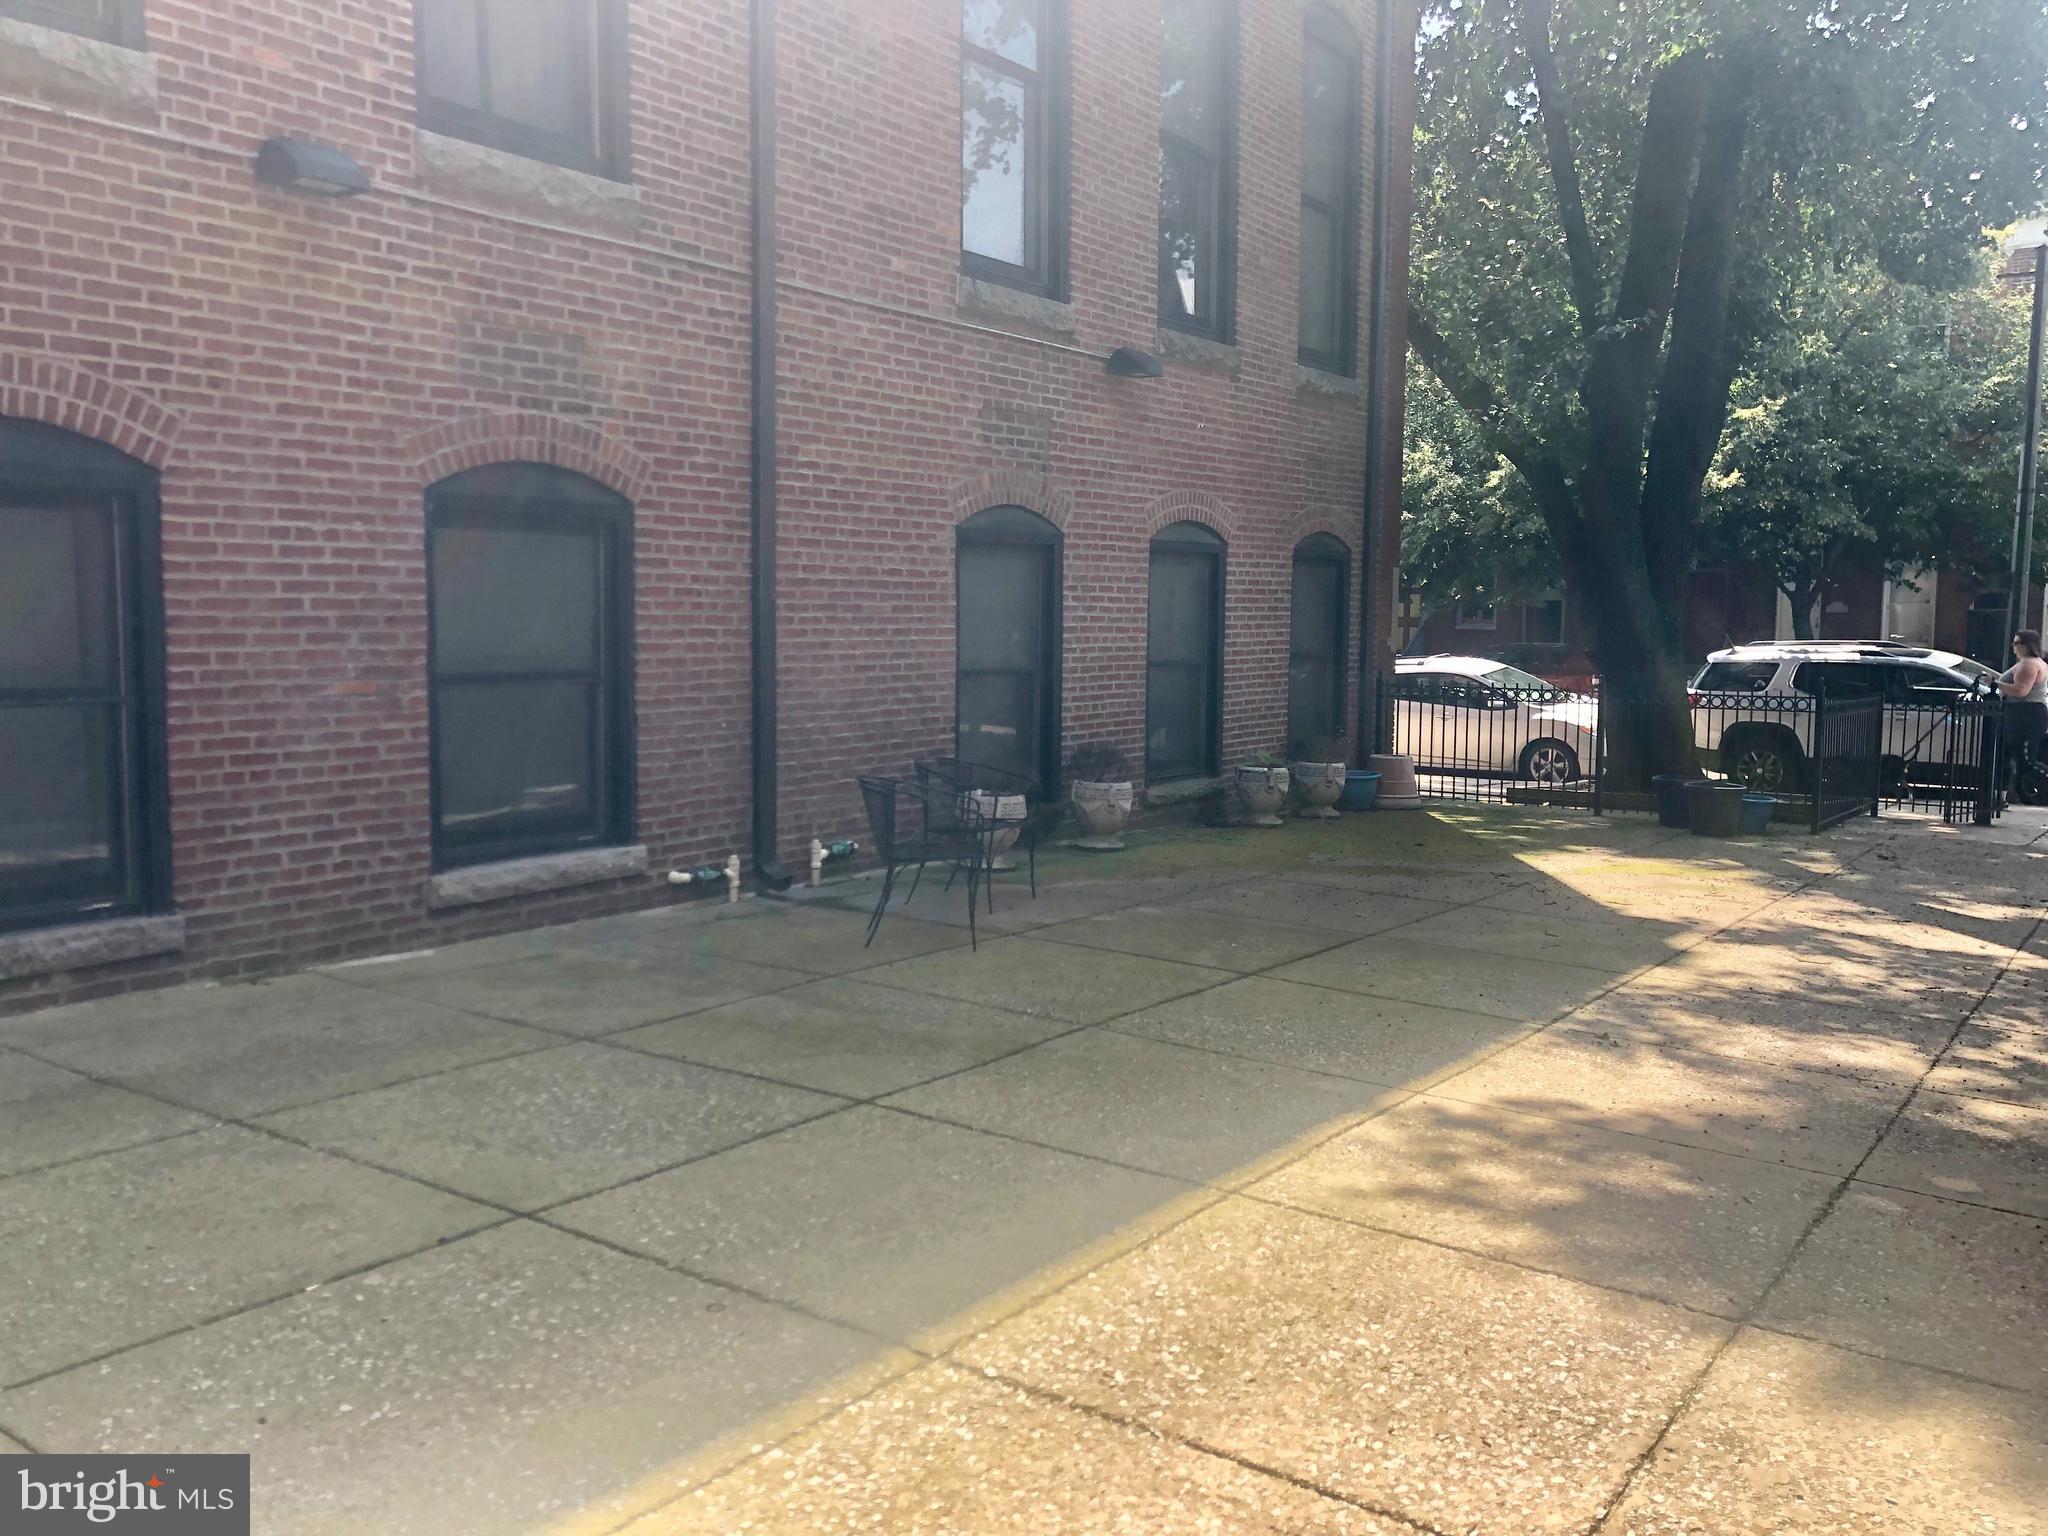 a couple of table and chairs in front of brick building